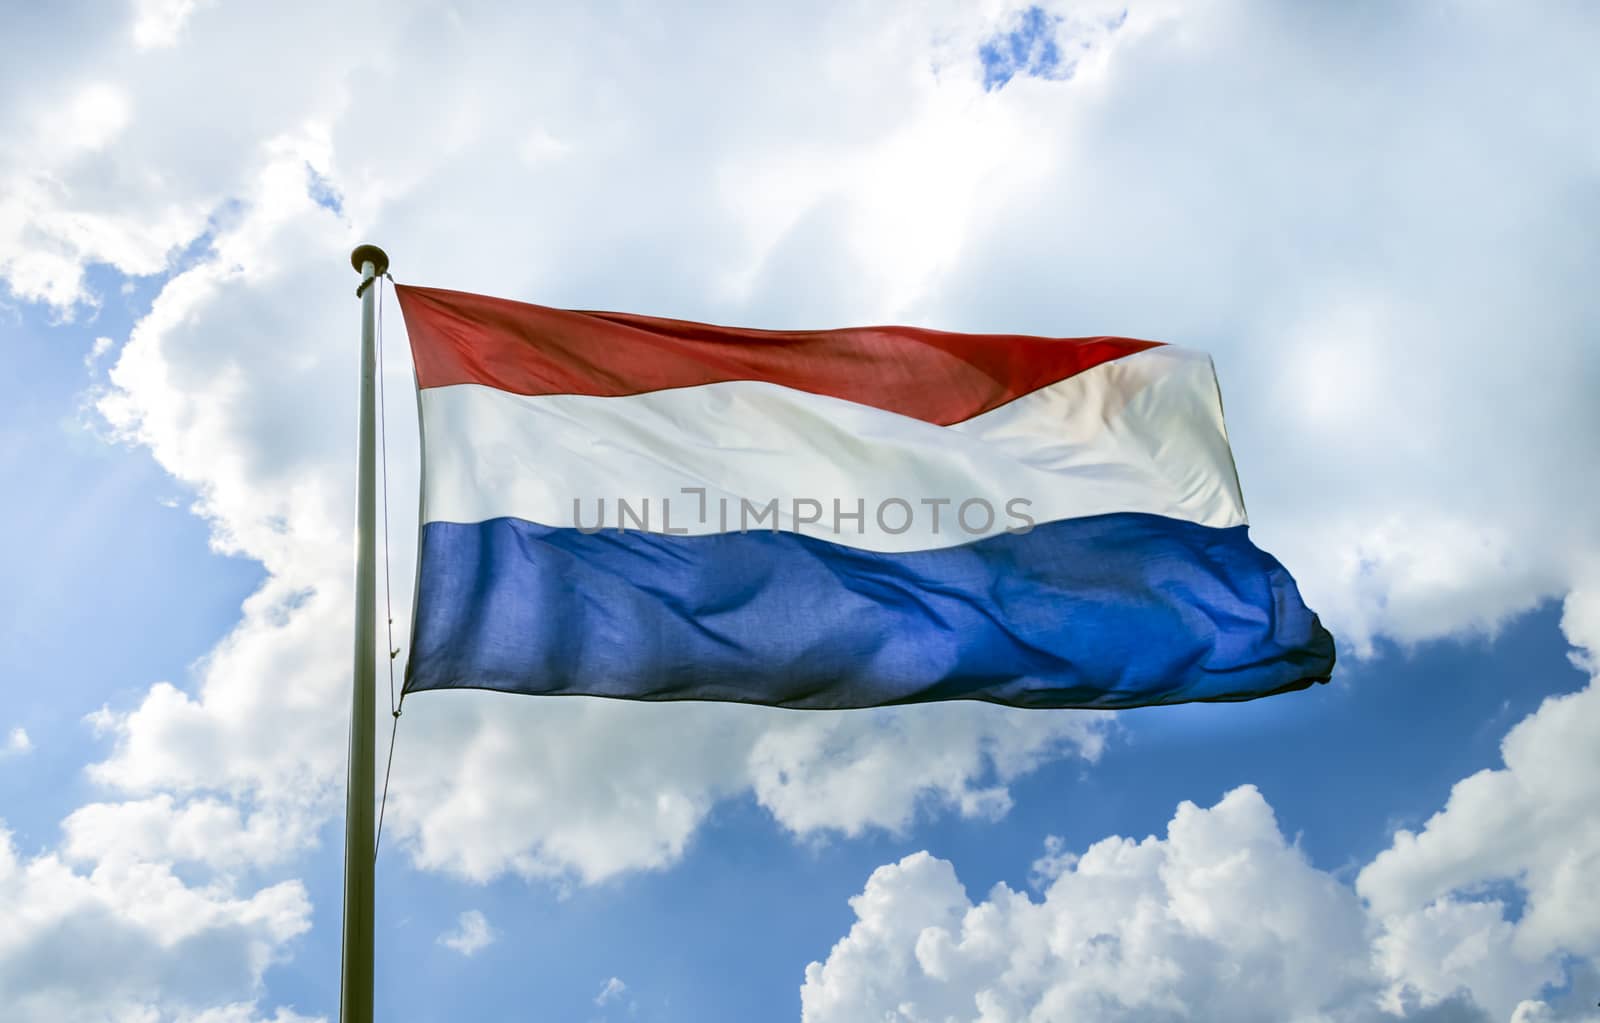 Waving flag of The Netherlands on the flagpole against cloudy blue sky